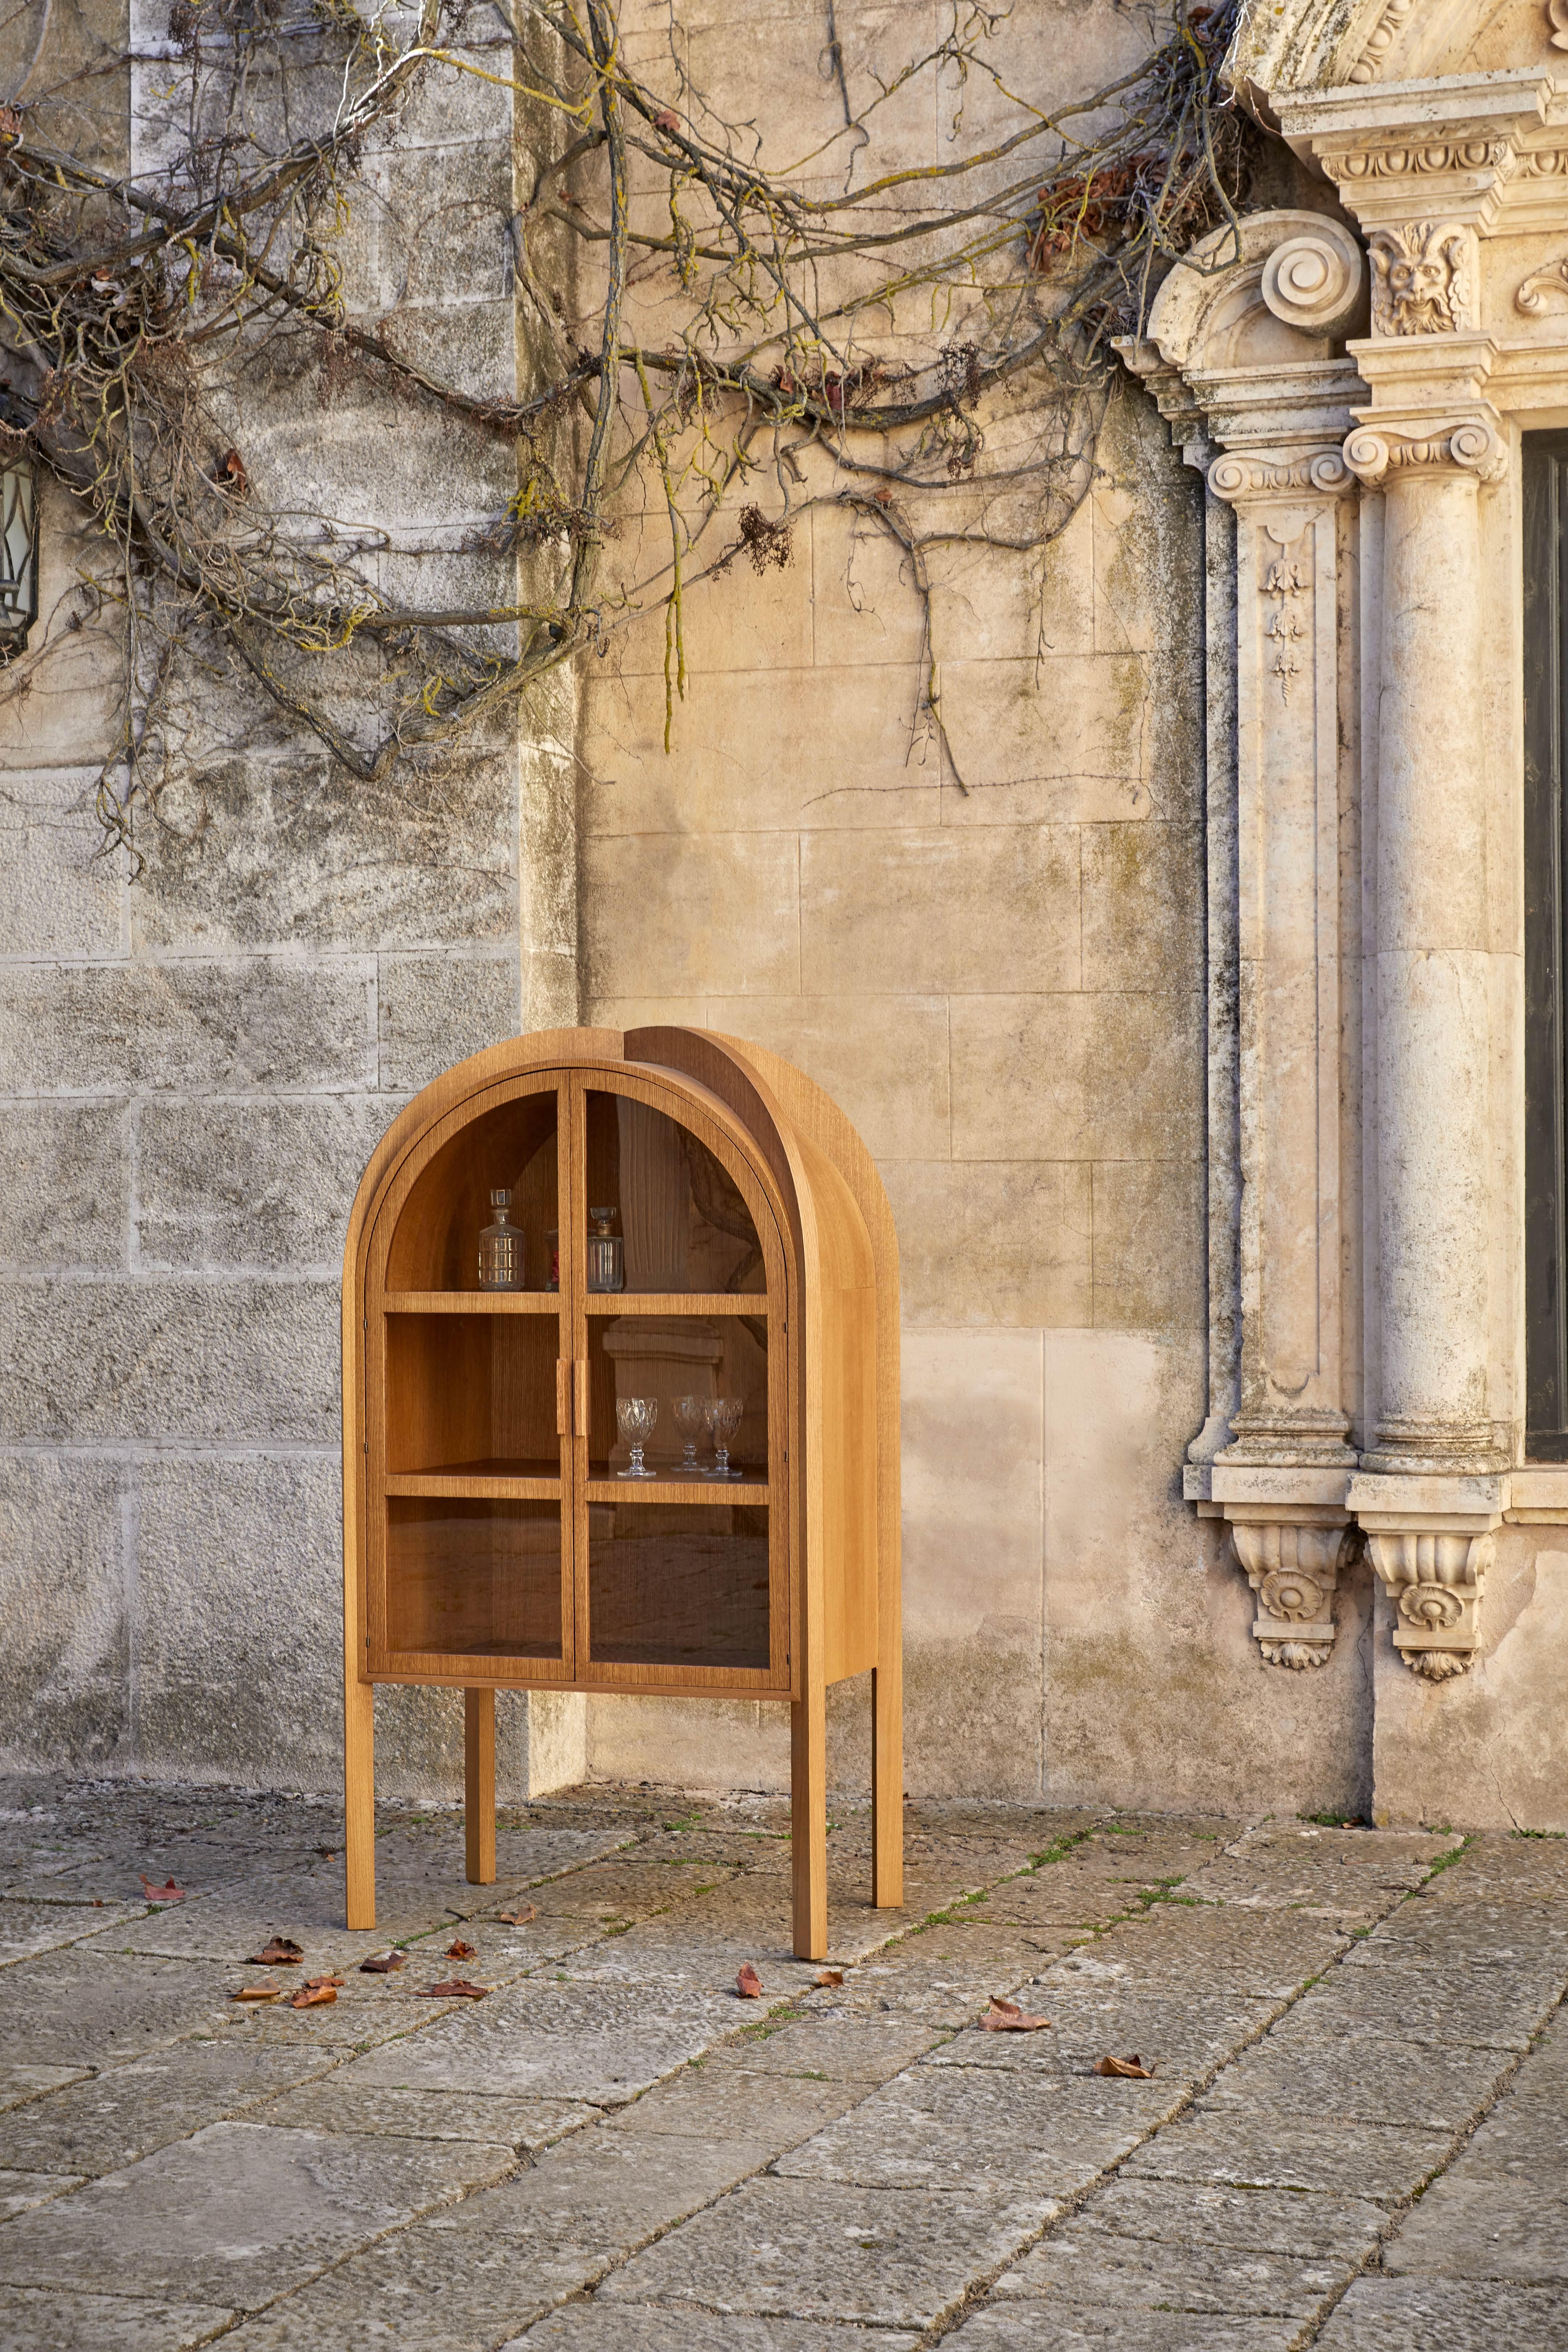 A reimagining of early Gothic architecture for the present day, this multi-use armoire has been exquisitely adapted for the contemporary lifestyle, with sensuous, soft curves that hint towards the Romanesque. The armoire features an apex adorned